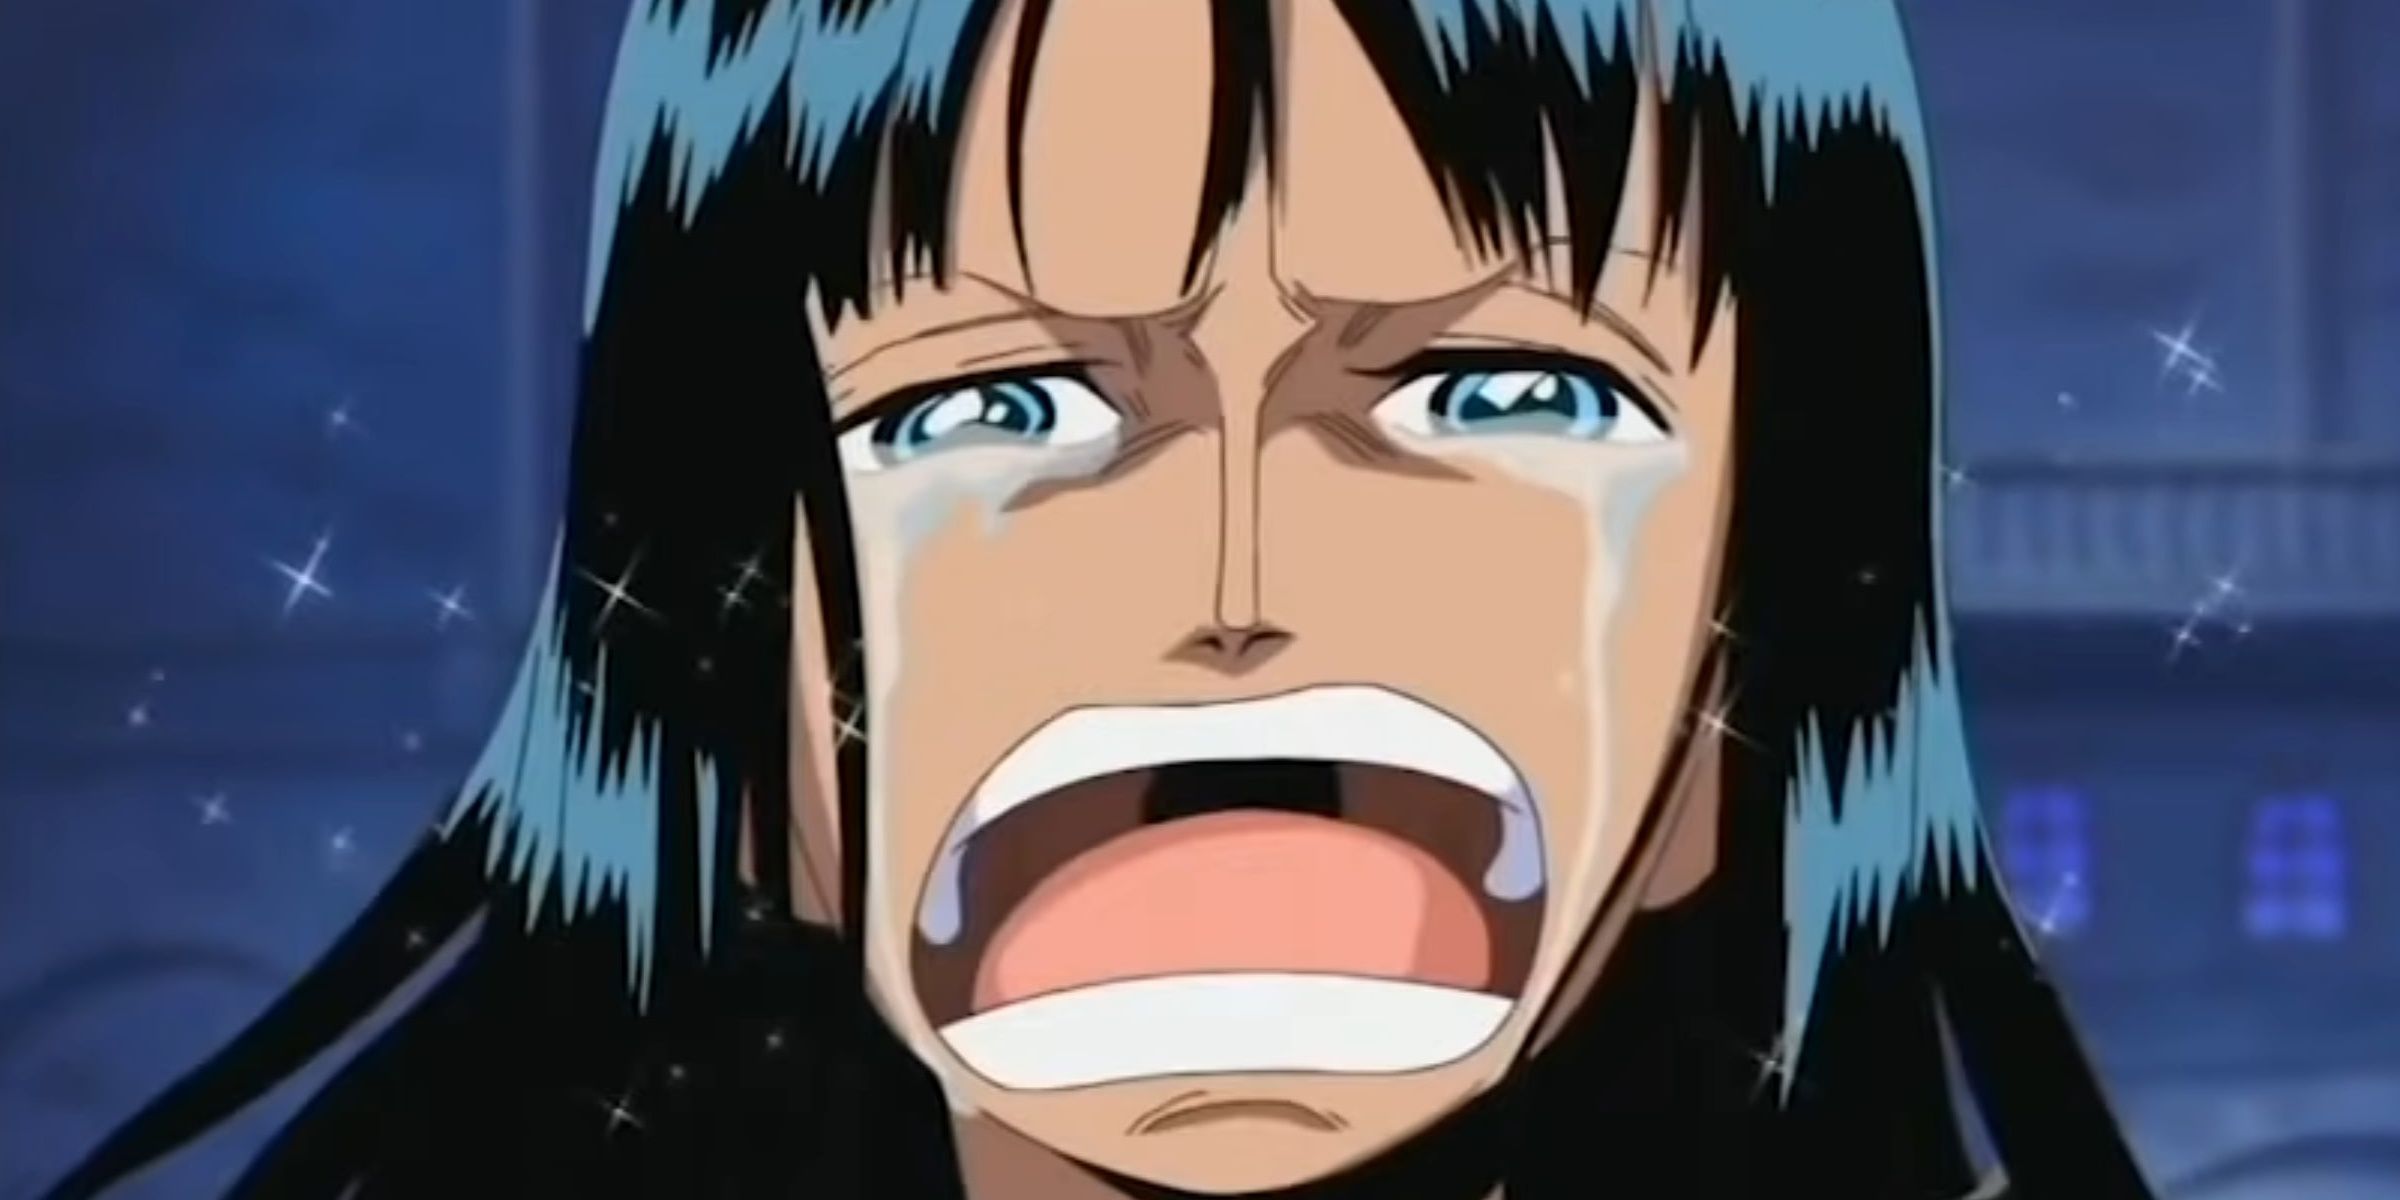 Robbin Crying in Joy from One Piece.